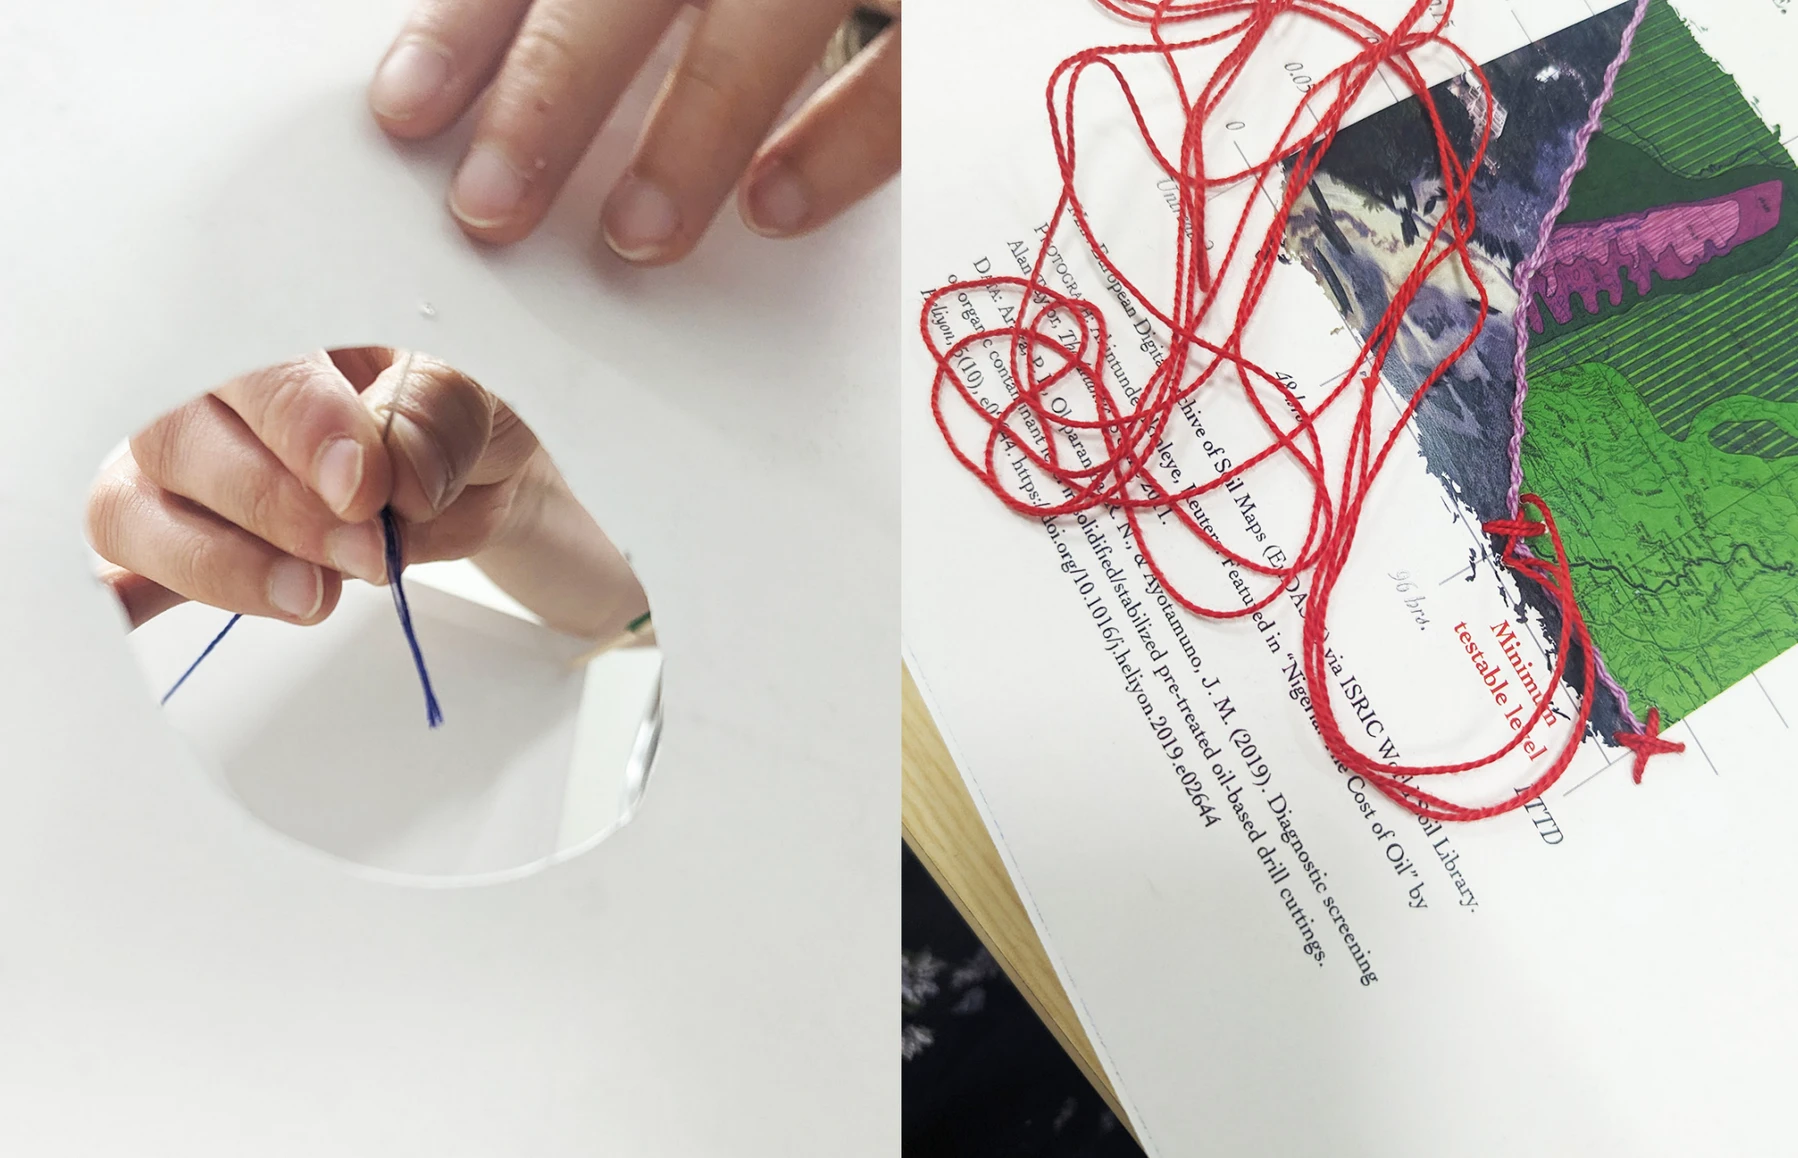 Process phots from the manual labor of ‘eco-mending’ data into artworks.